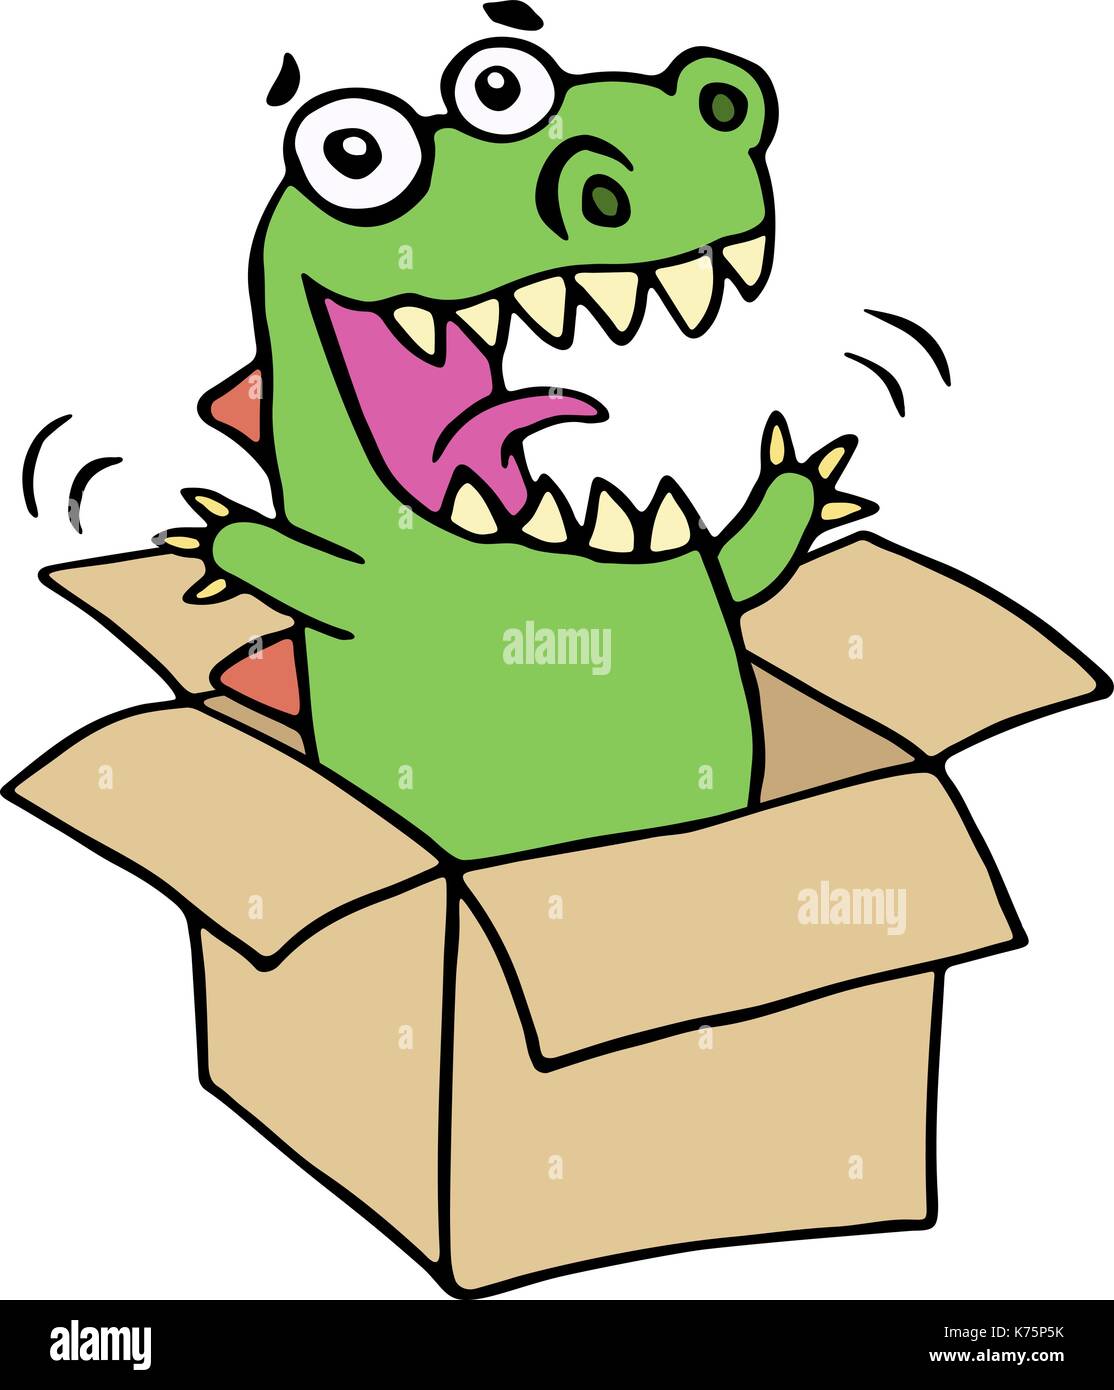 Jumping dinosaur Stock Vector Images - Alamy